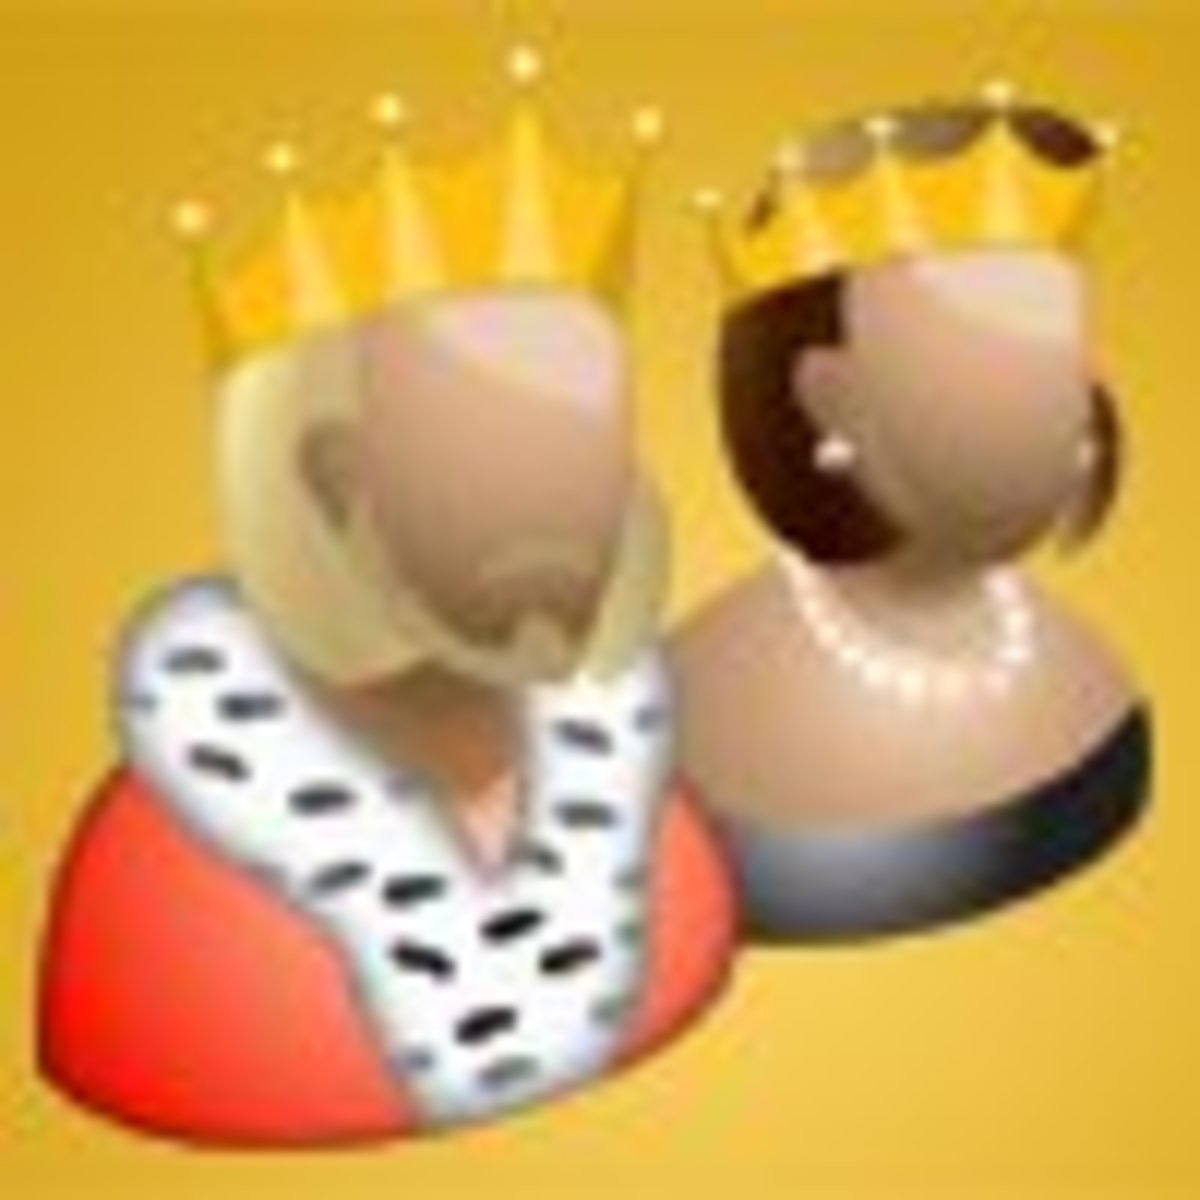 Become King (or Queen) of the World on a Facebook Game